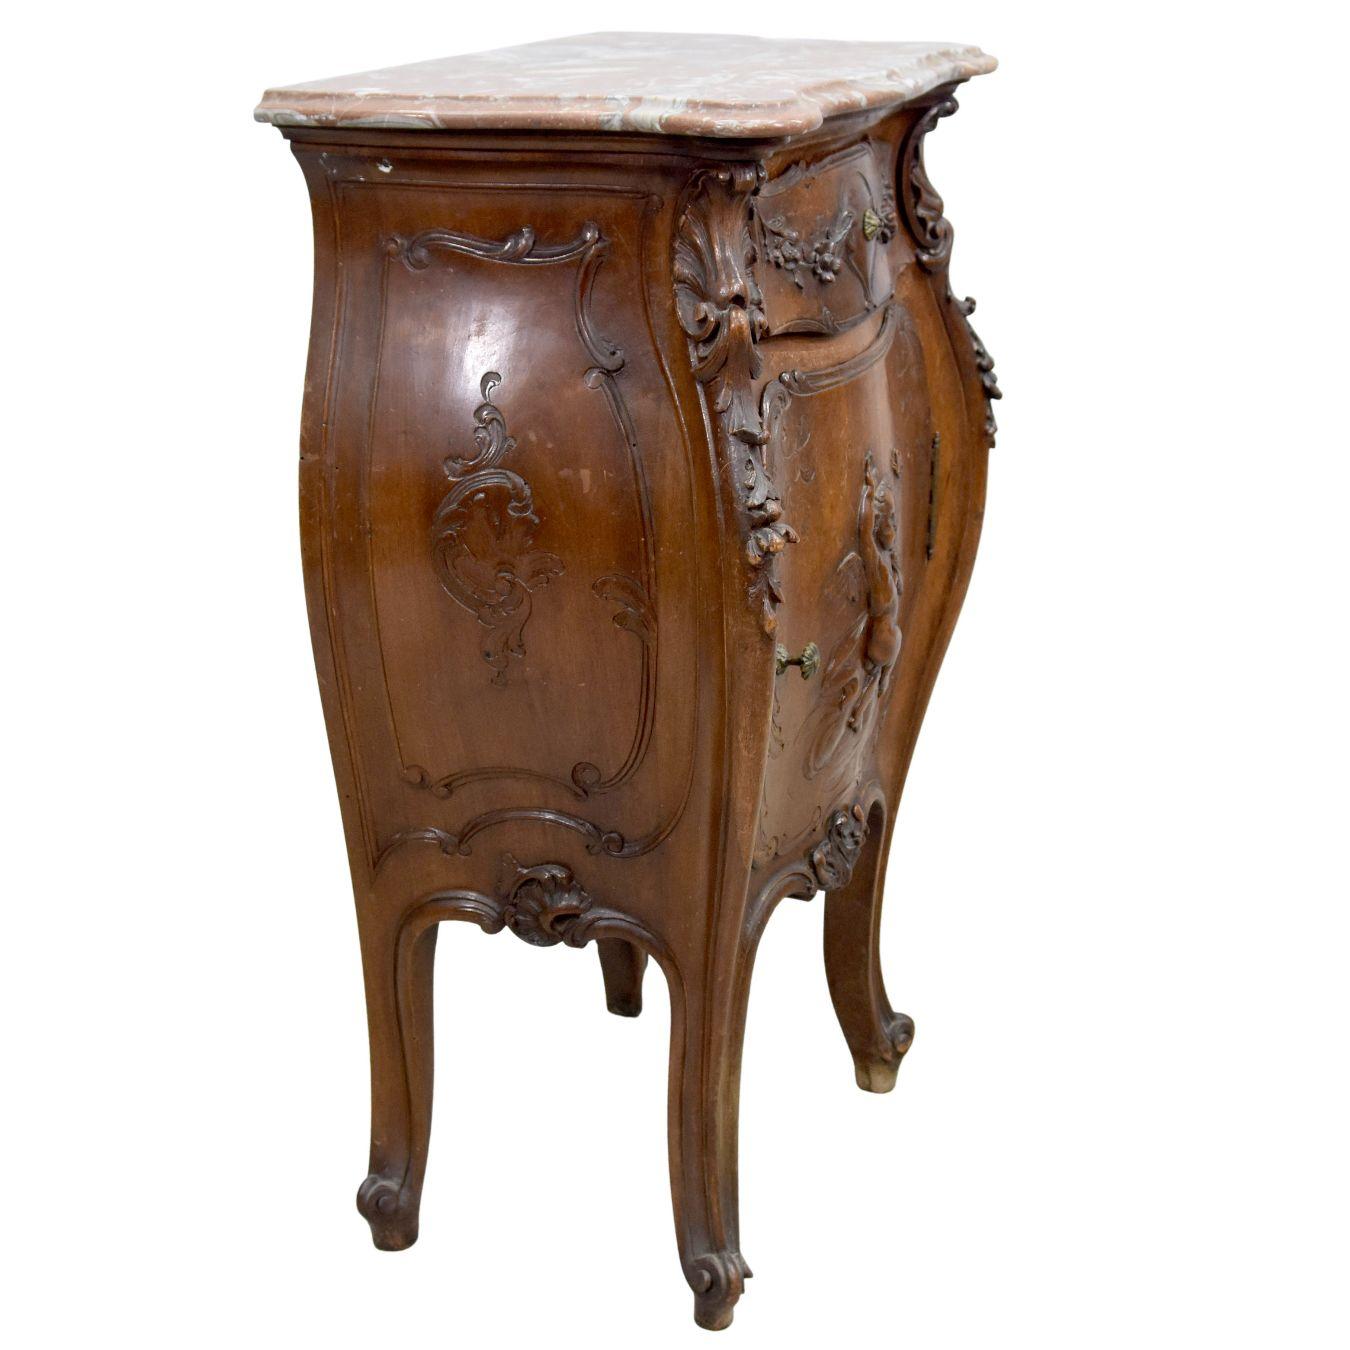 19th Century 19th Baroque Louis XV Rococo Style Walnut Bedside Table with Putti